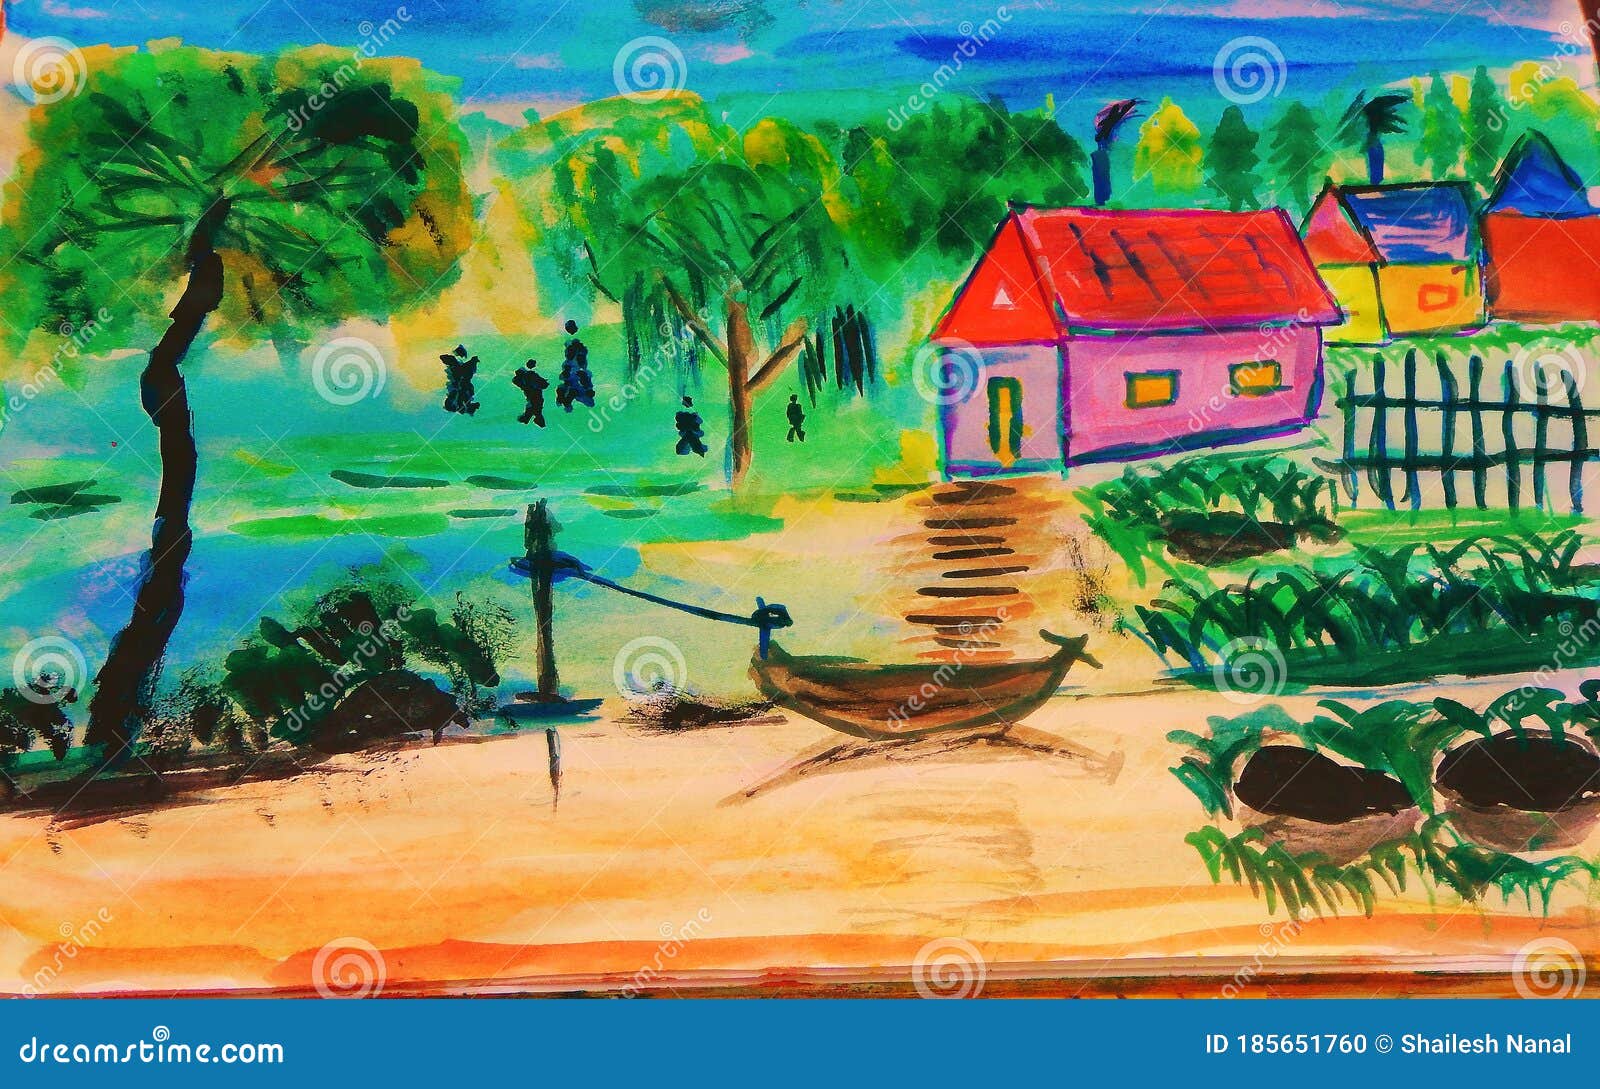 How to Draw Village Scenery Easily Step by Step With Oil Pastels-saigonsouth.com.vn